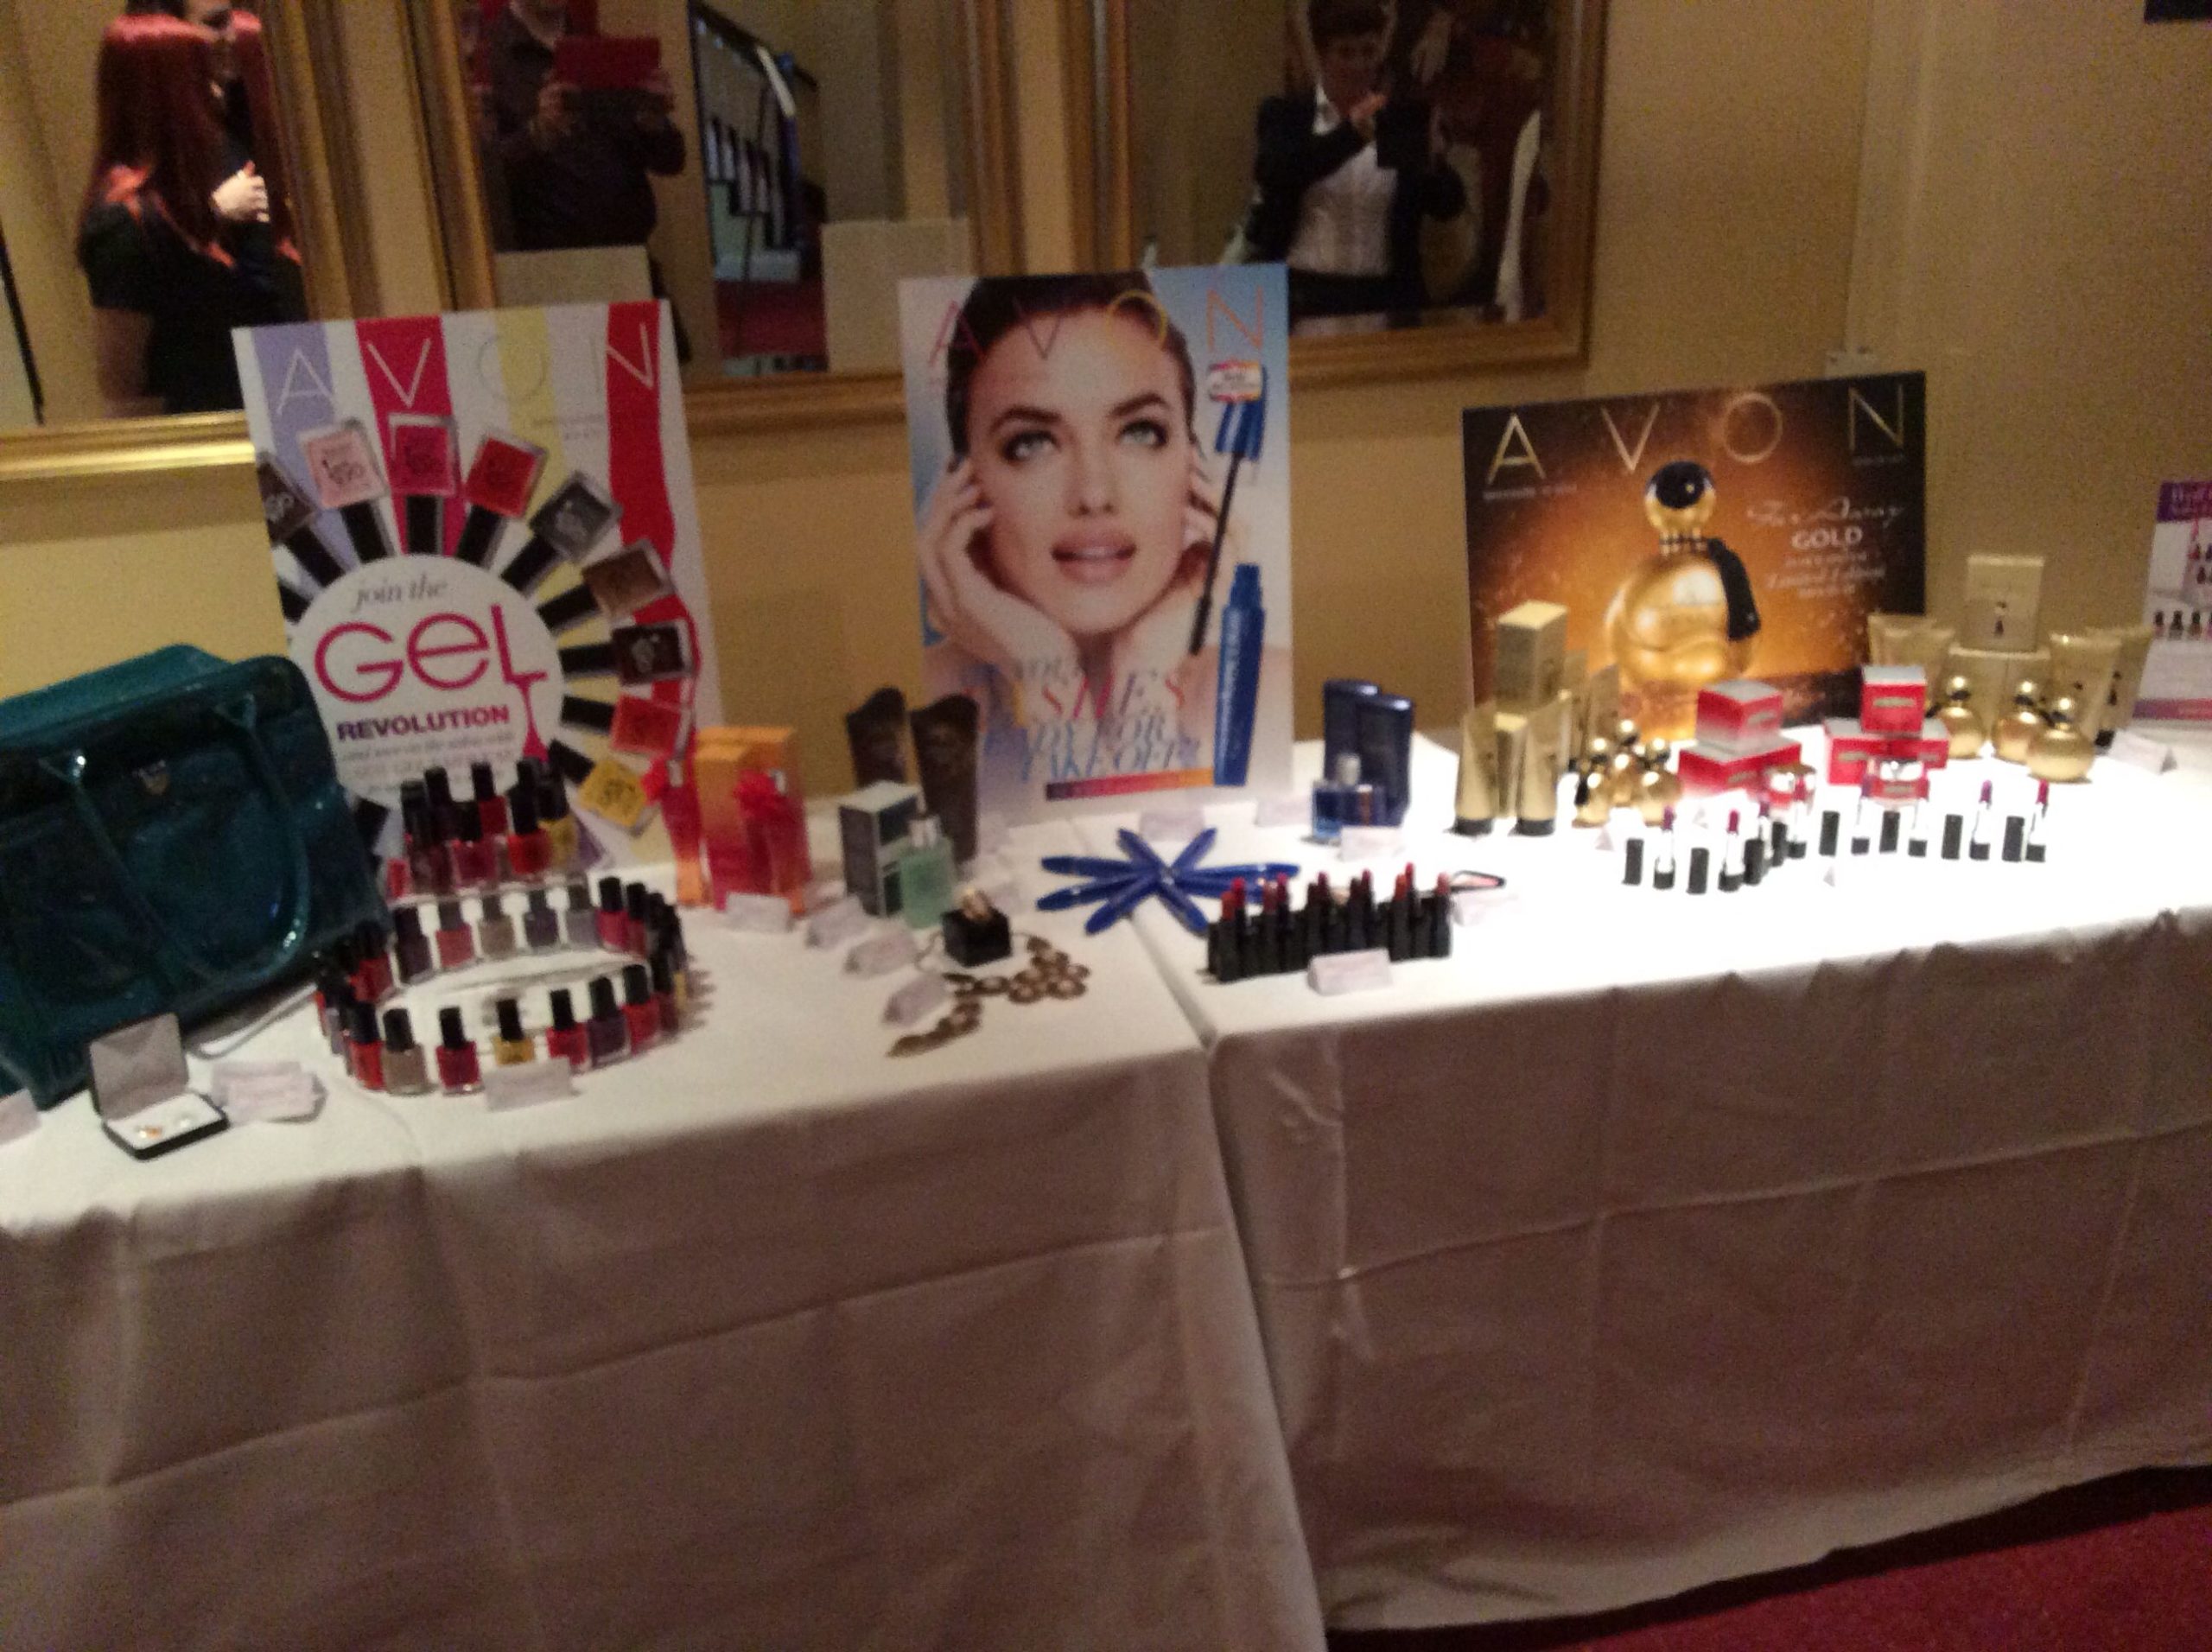 Upcoming New products for 2014, recently displayed at an Avon